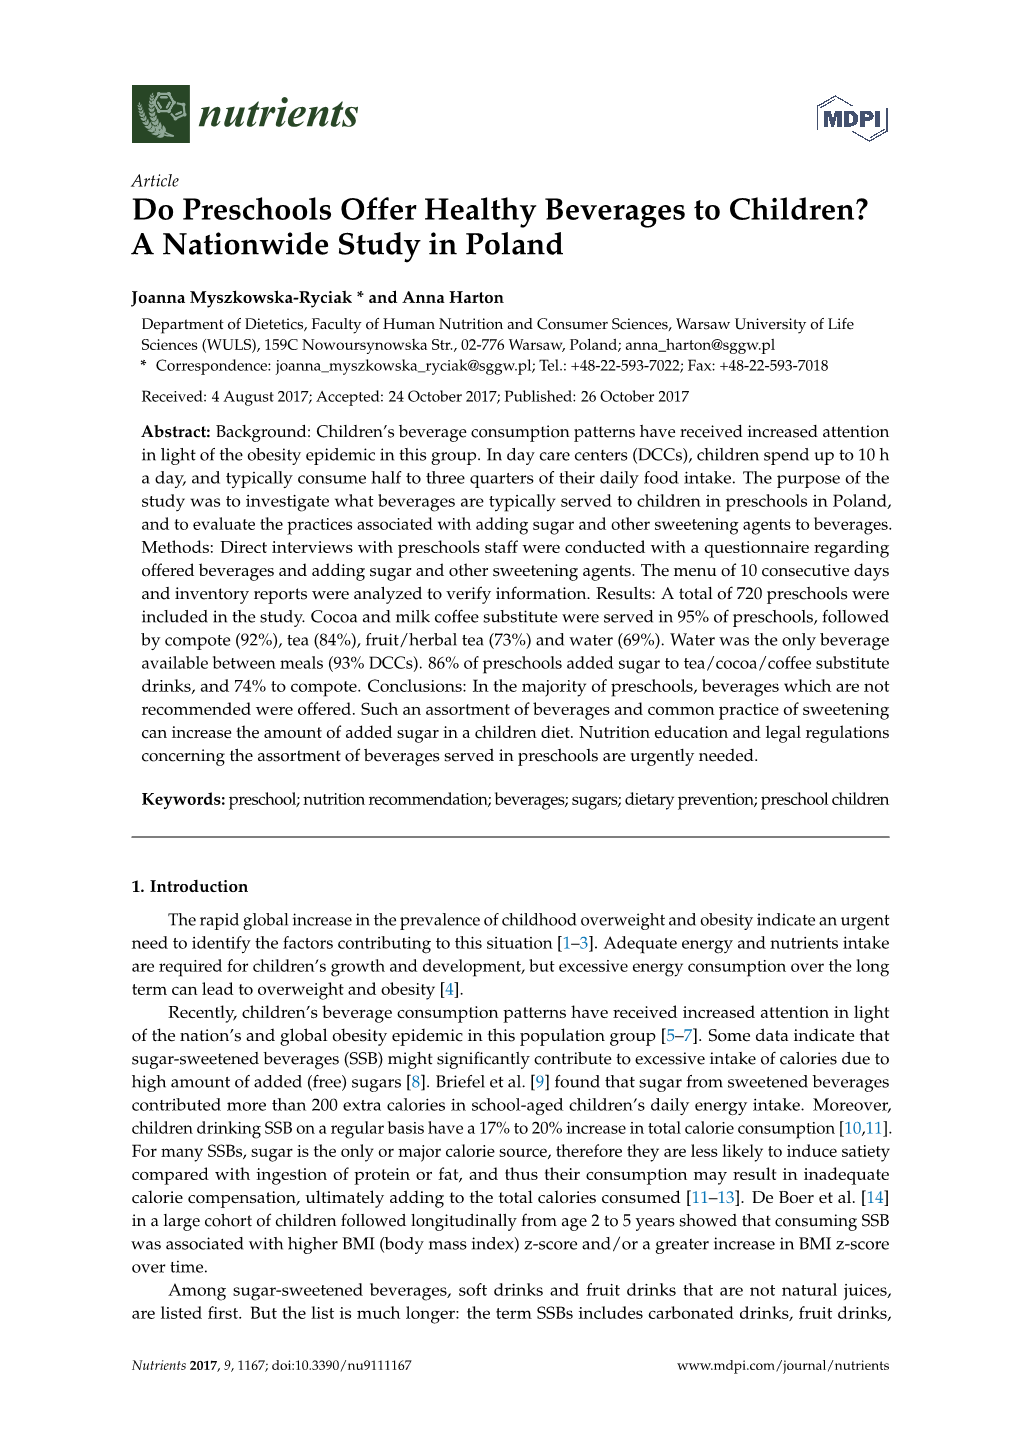 Do Preschools Offer Healthy Beverages to Children? a Nationwide Study in Poland